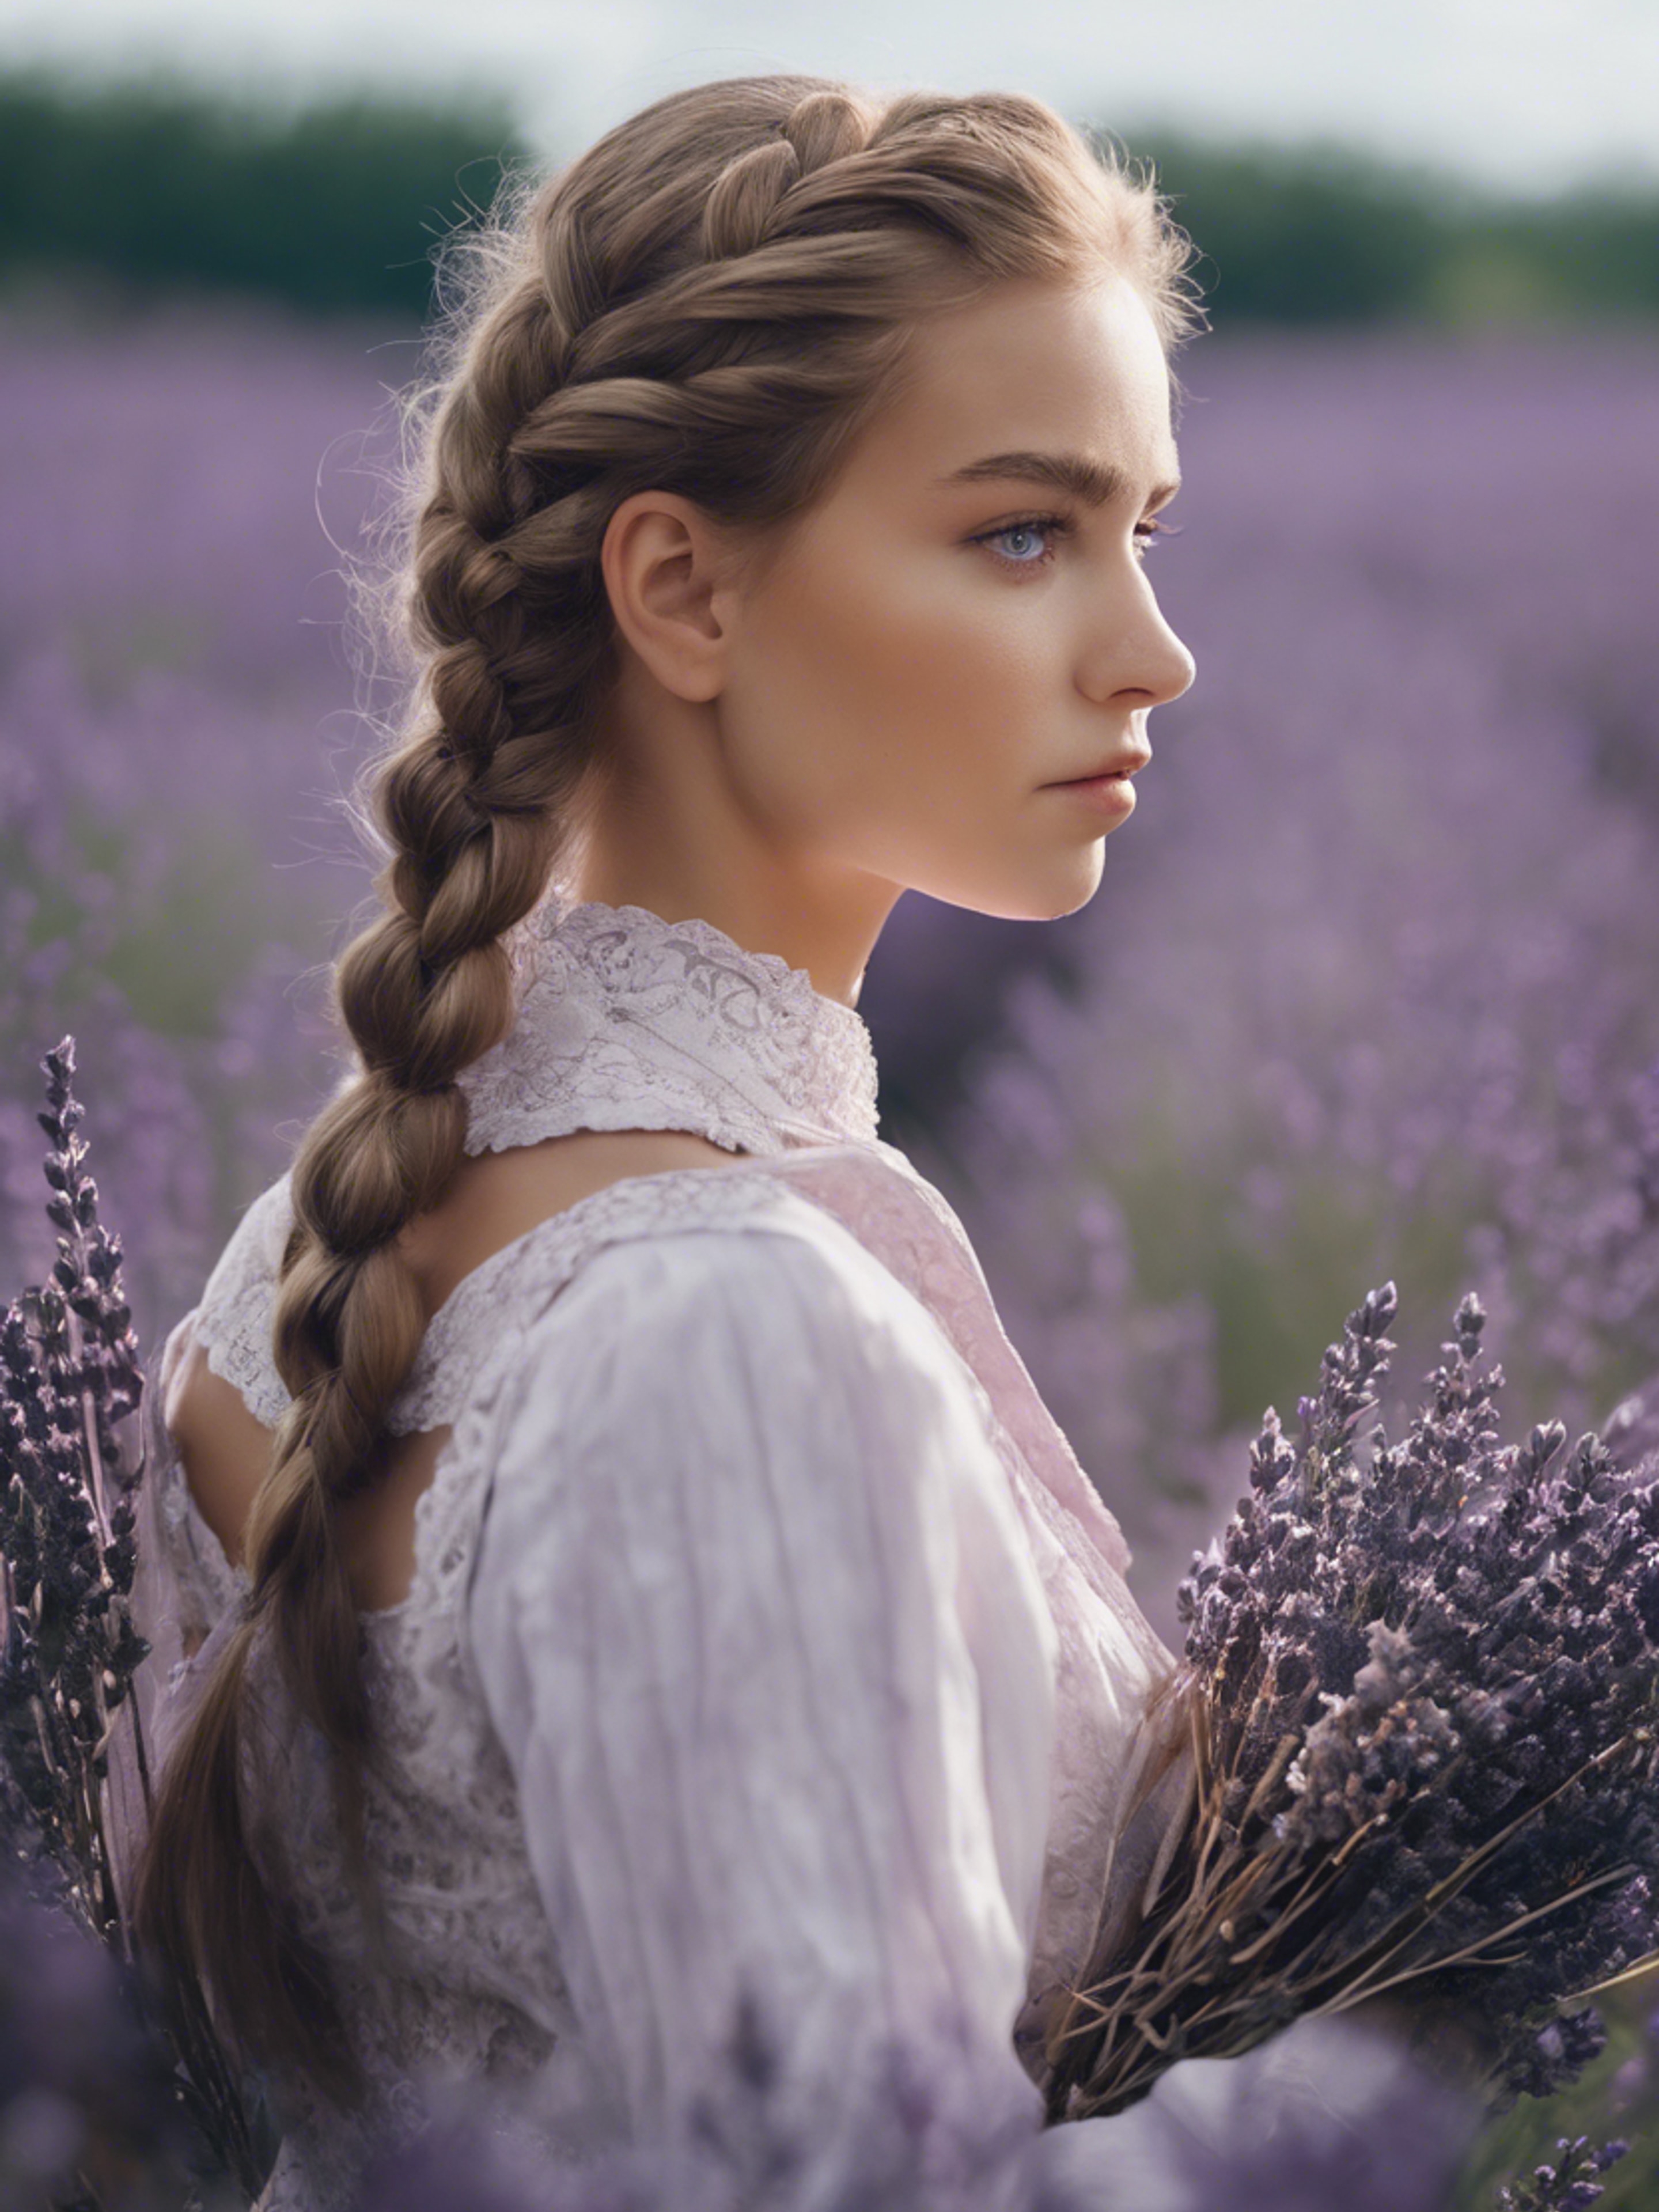 A pretty, light-eyed girl with her hair done in classic French braid, surrounded by a field of French lavender. Tapeta[c71d23e36c7041a09435]